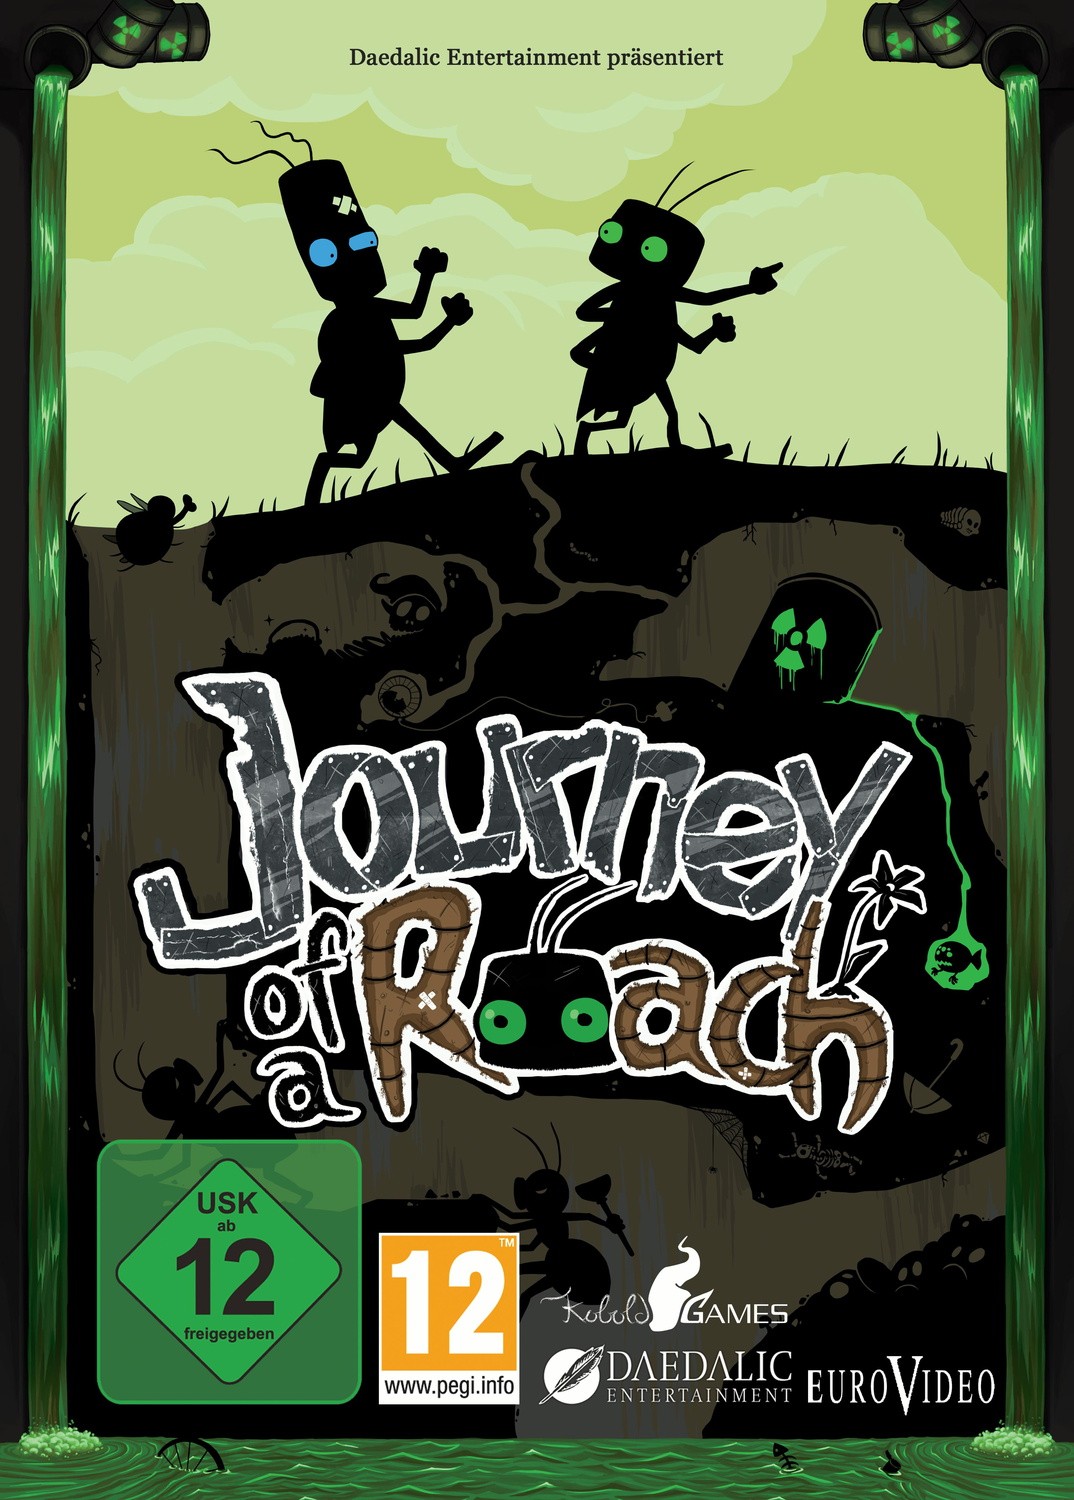 Journey Of A Roach Backgrounds, Compatible - PC, Mobile, Gadgets| 1074x1500 px